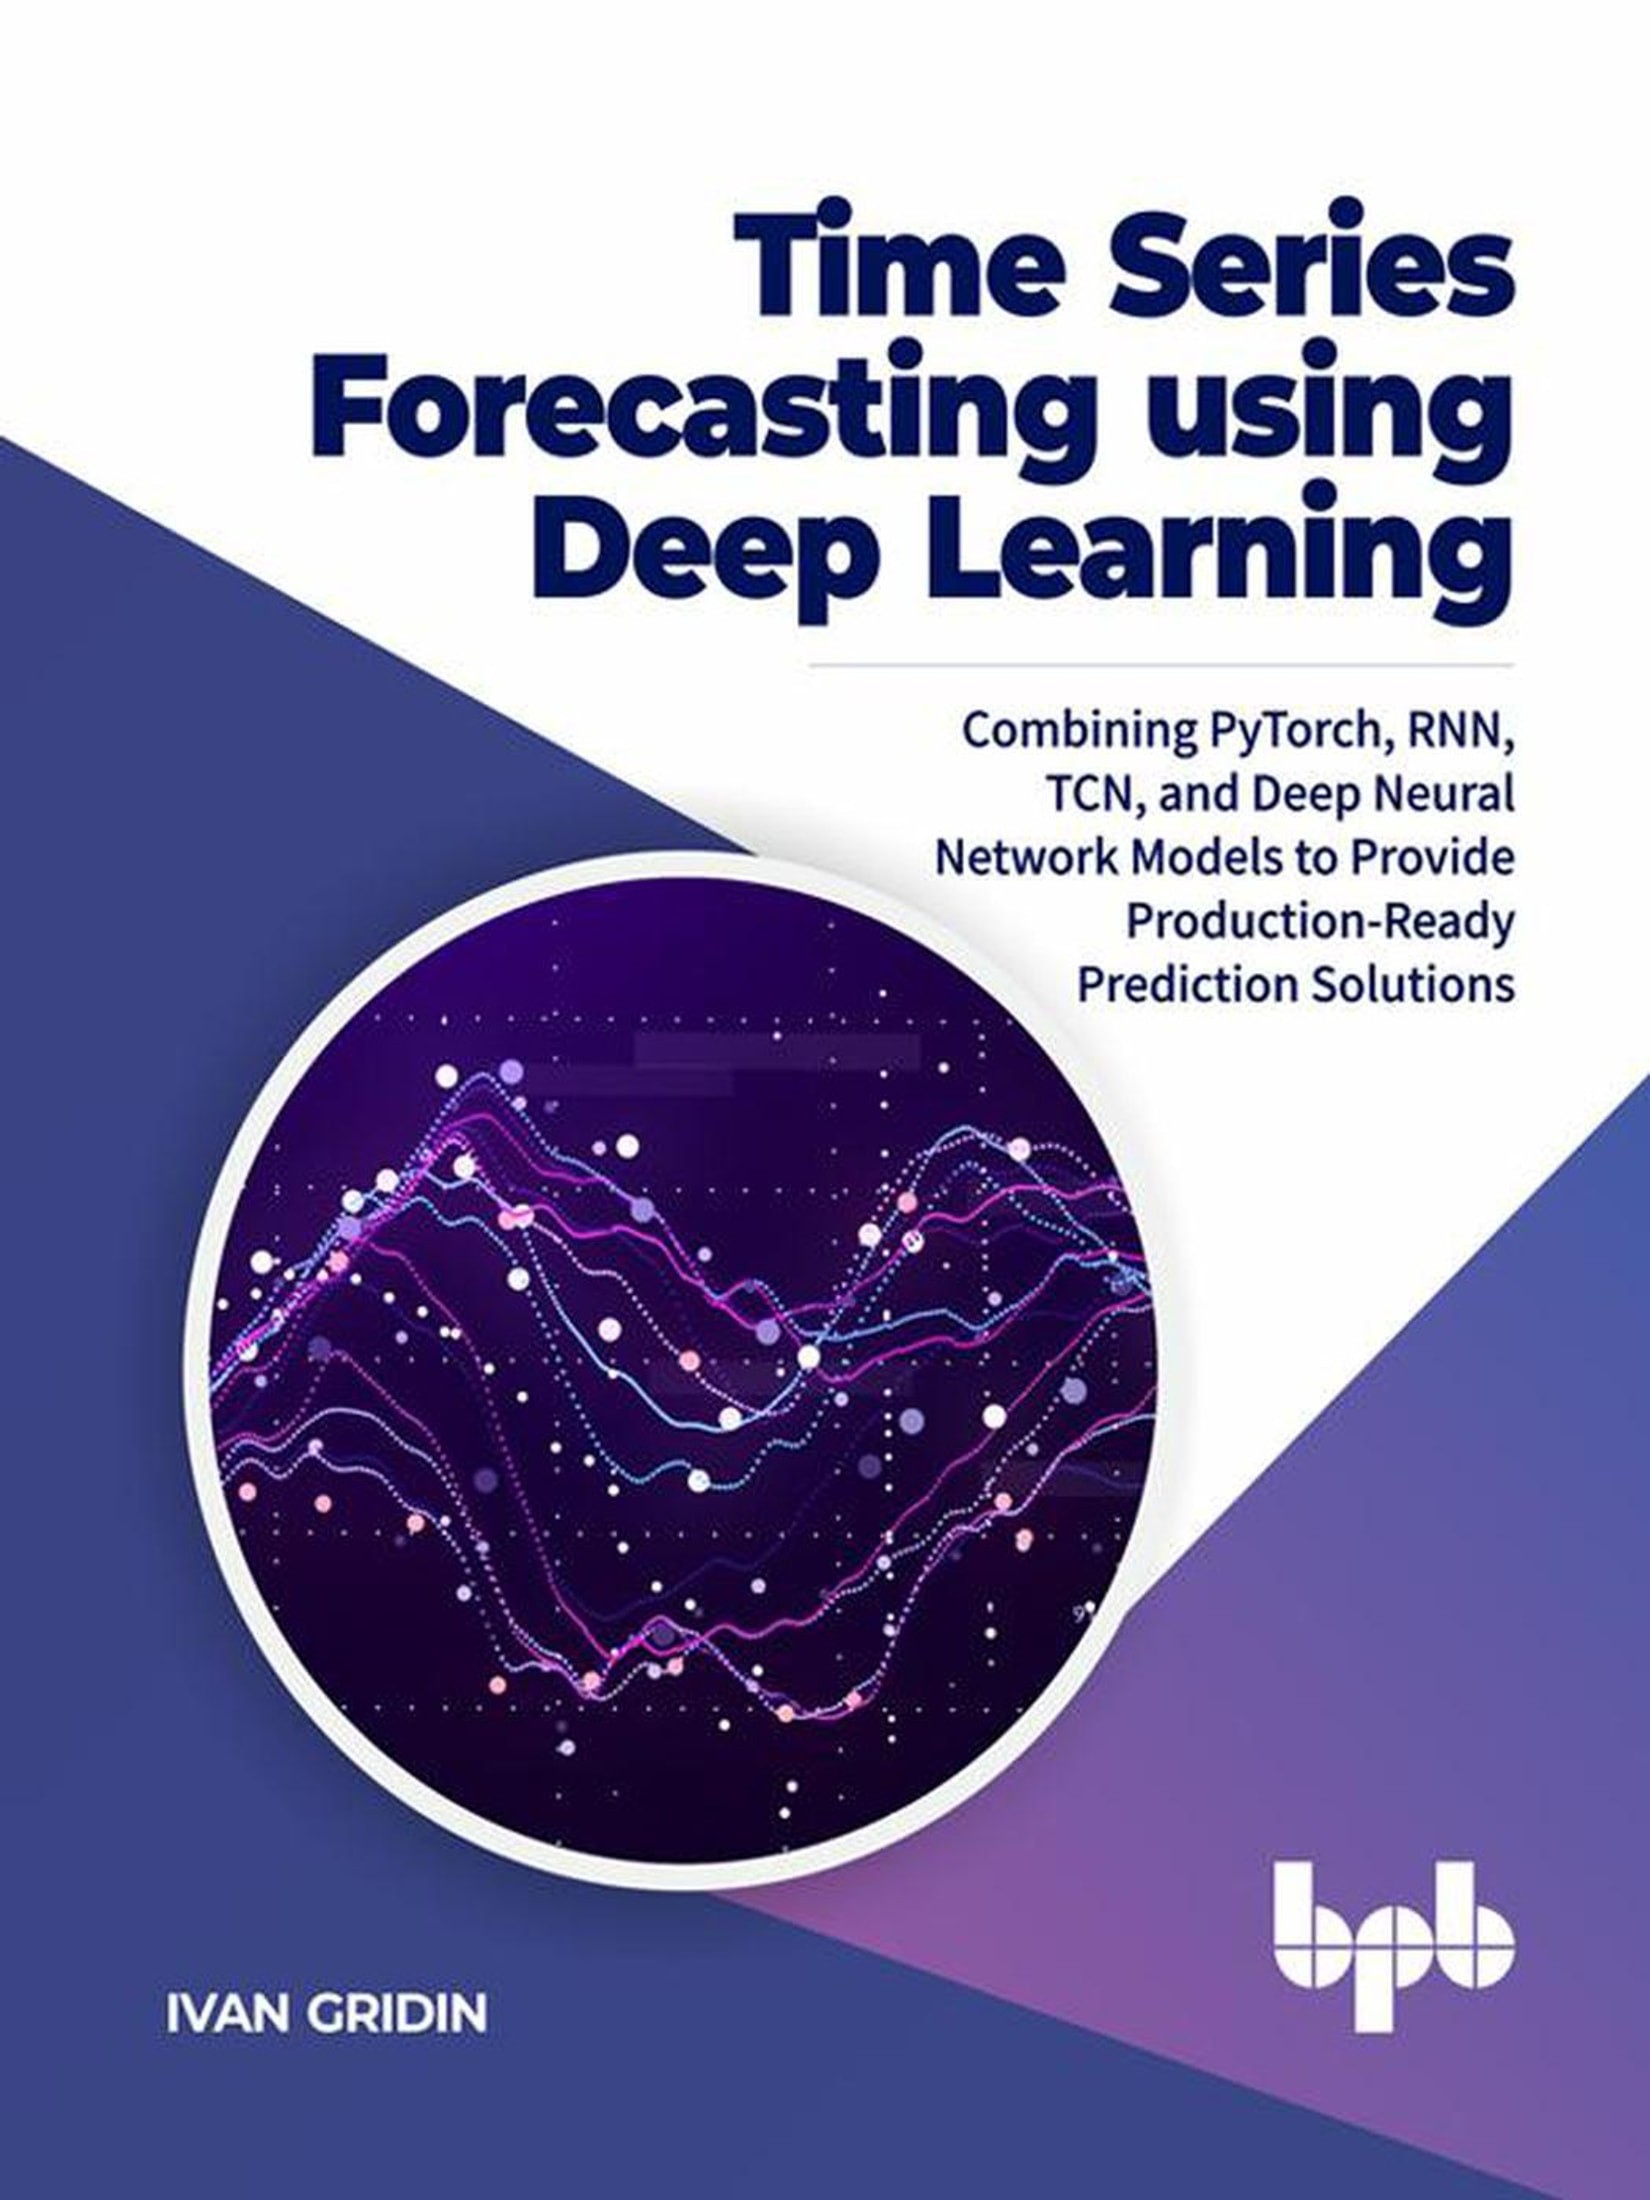 Time Series Forecasting using Deep Learning: Combining PyTorch, RNN, TCN, and Deep Neural Network Models to Provide Production-Ready Prediction Solutions